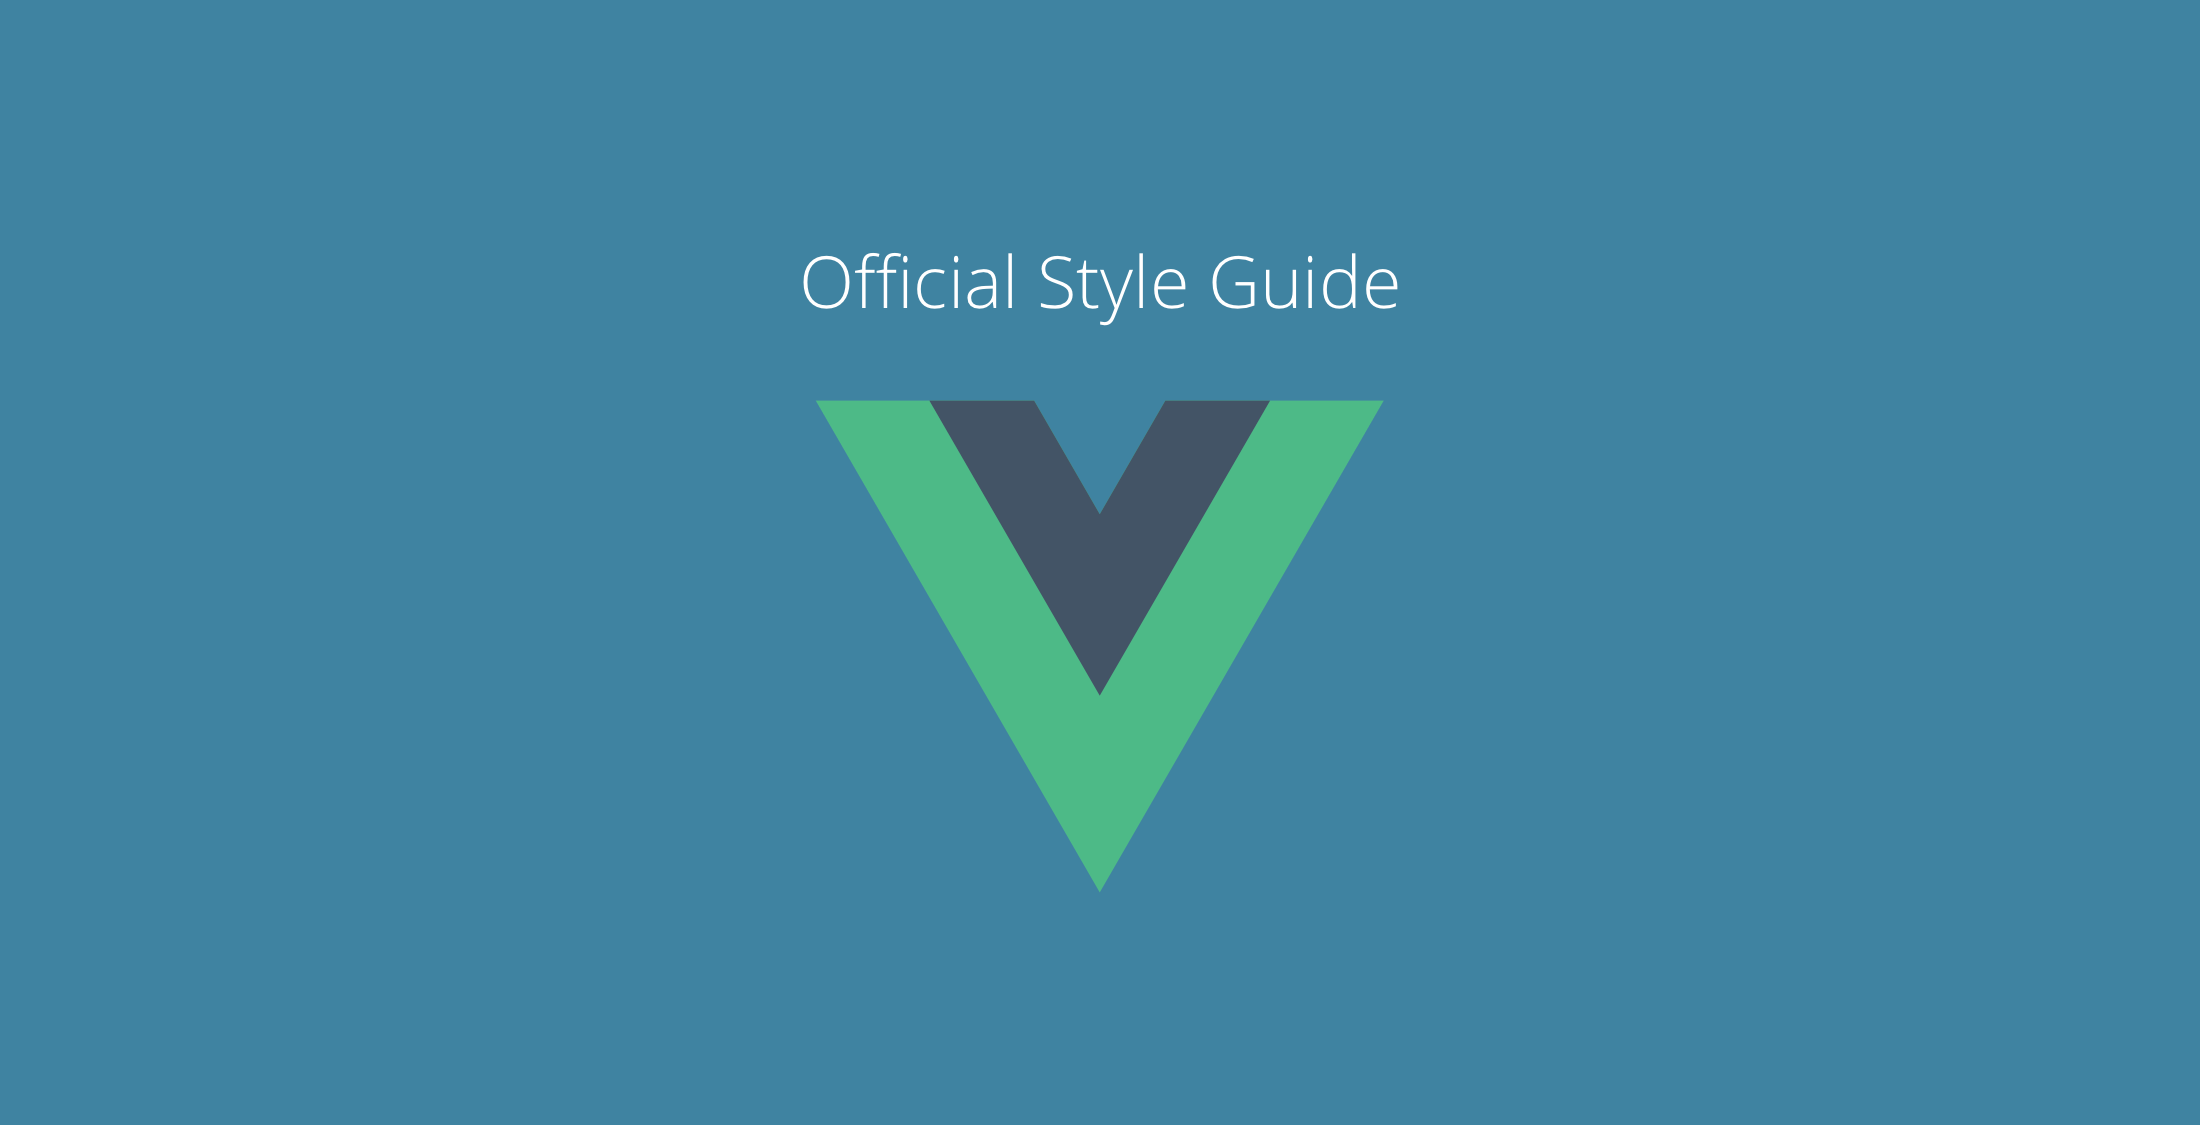 Vue.js Official Style Guide Is Here! image